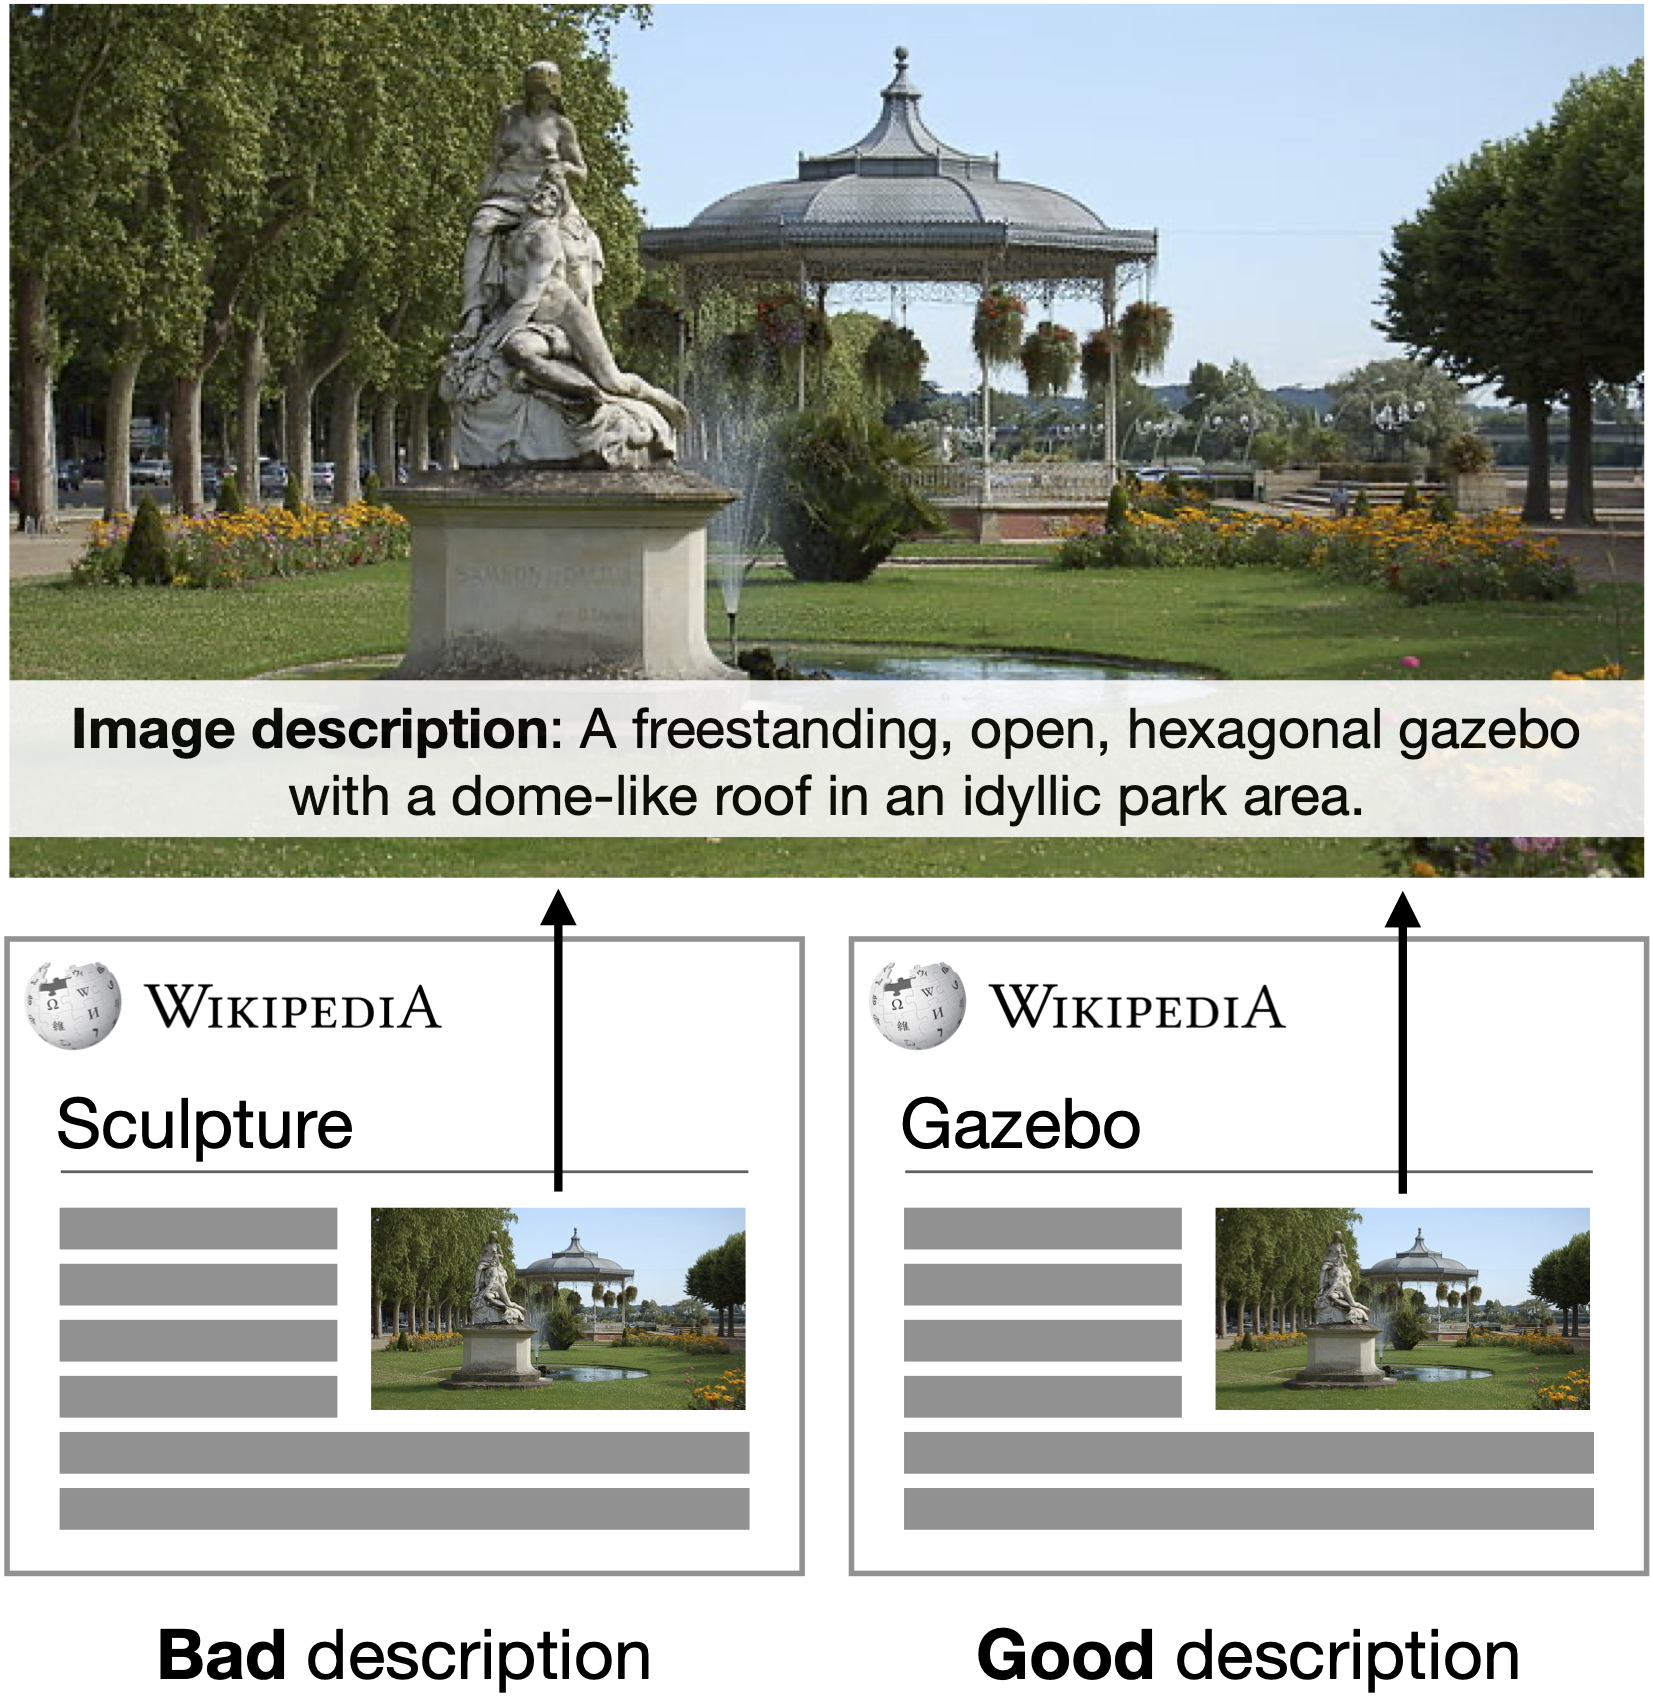 An image of a park with the overlayed image description 'A freestanding, open, hexagonal gazebo with a dome-like roof in an idyllic park area.' Together with the description, the picture is embedded in the Wikipedia article for Gazebos where it's marked as a good description, and in the Wikipedia article for Sculptures where it's marked as a bad description.